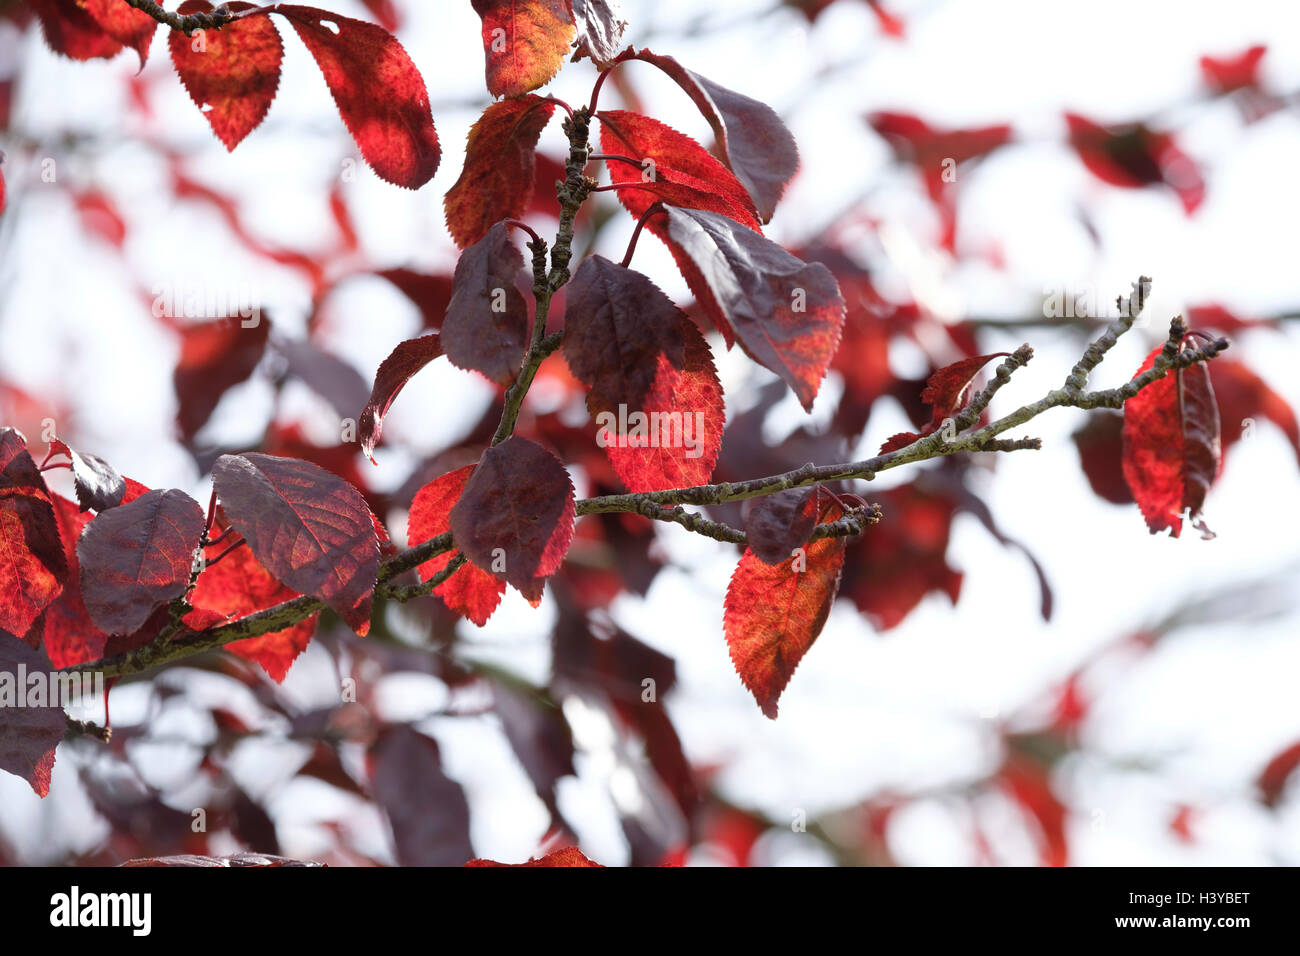 Backlit red leaves on a plum tree Stock Photo